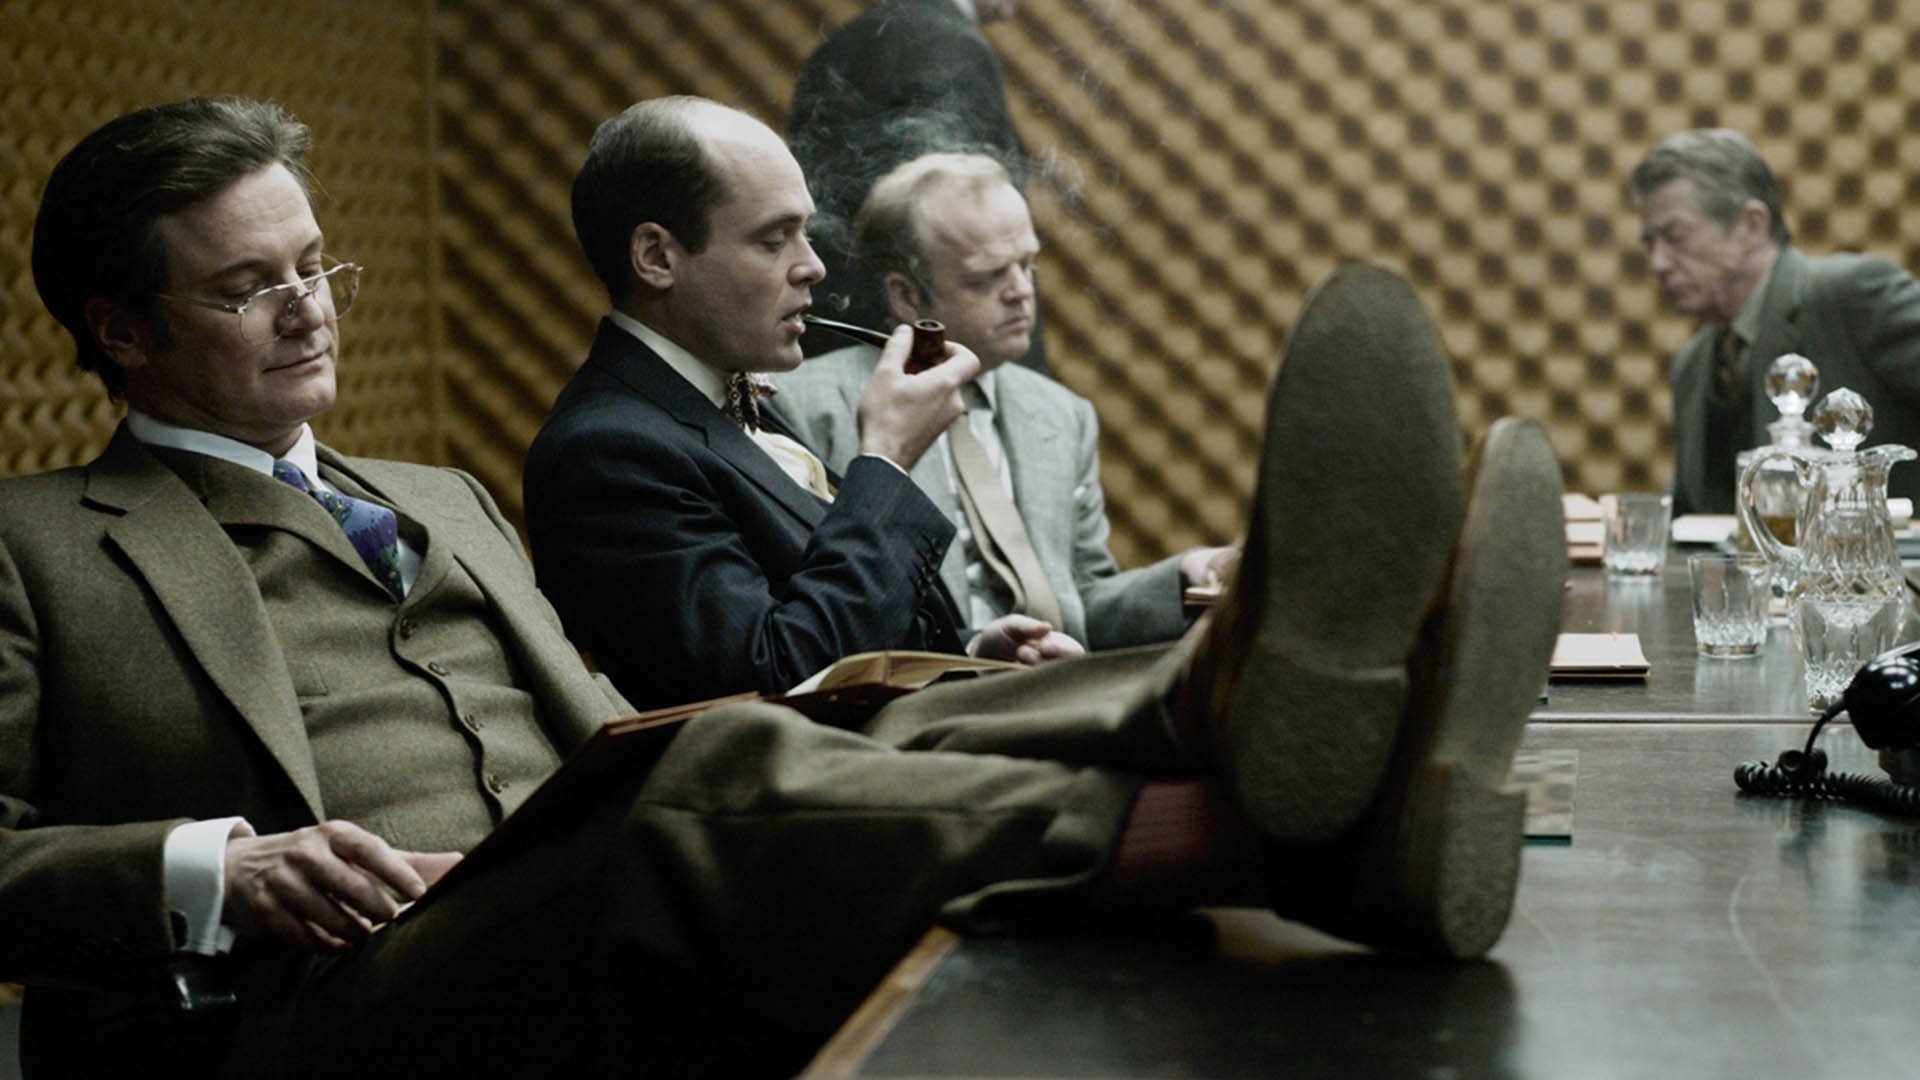 Toby Jones and Colin Firth studying in Tinker Tailor Soldier Spy